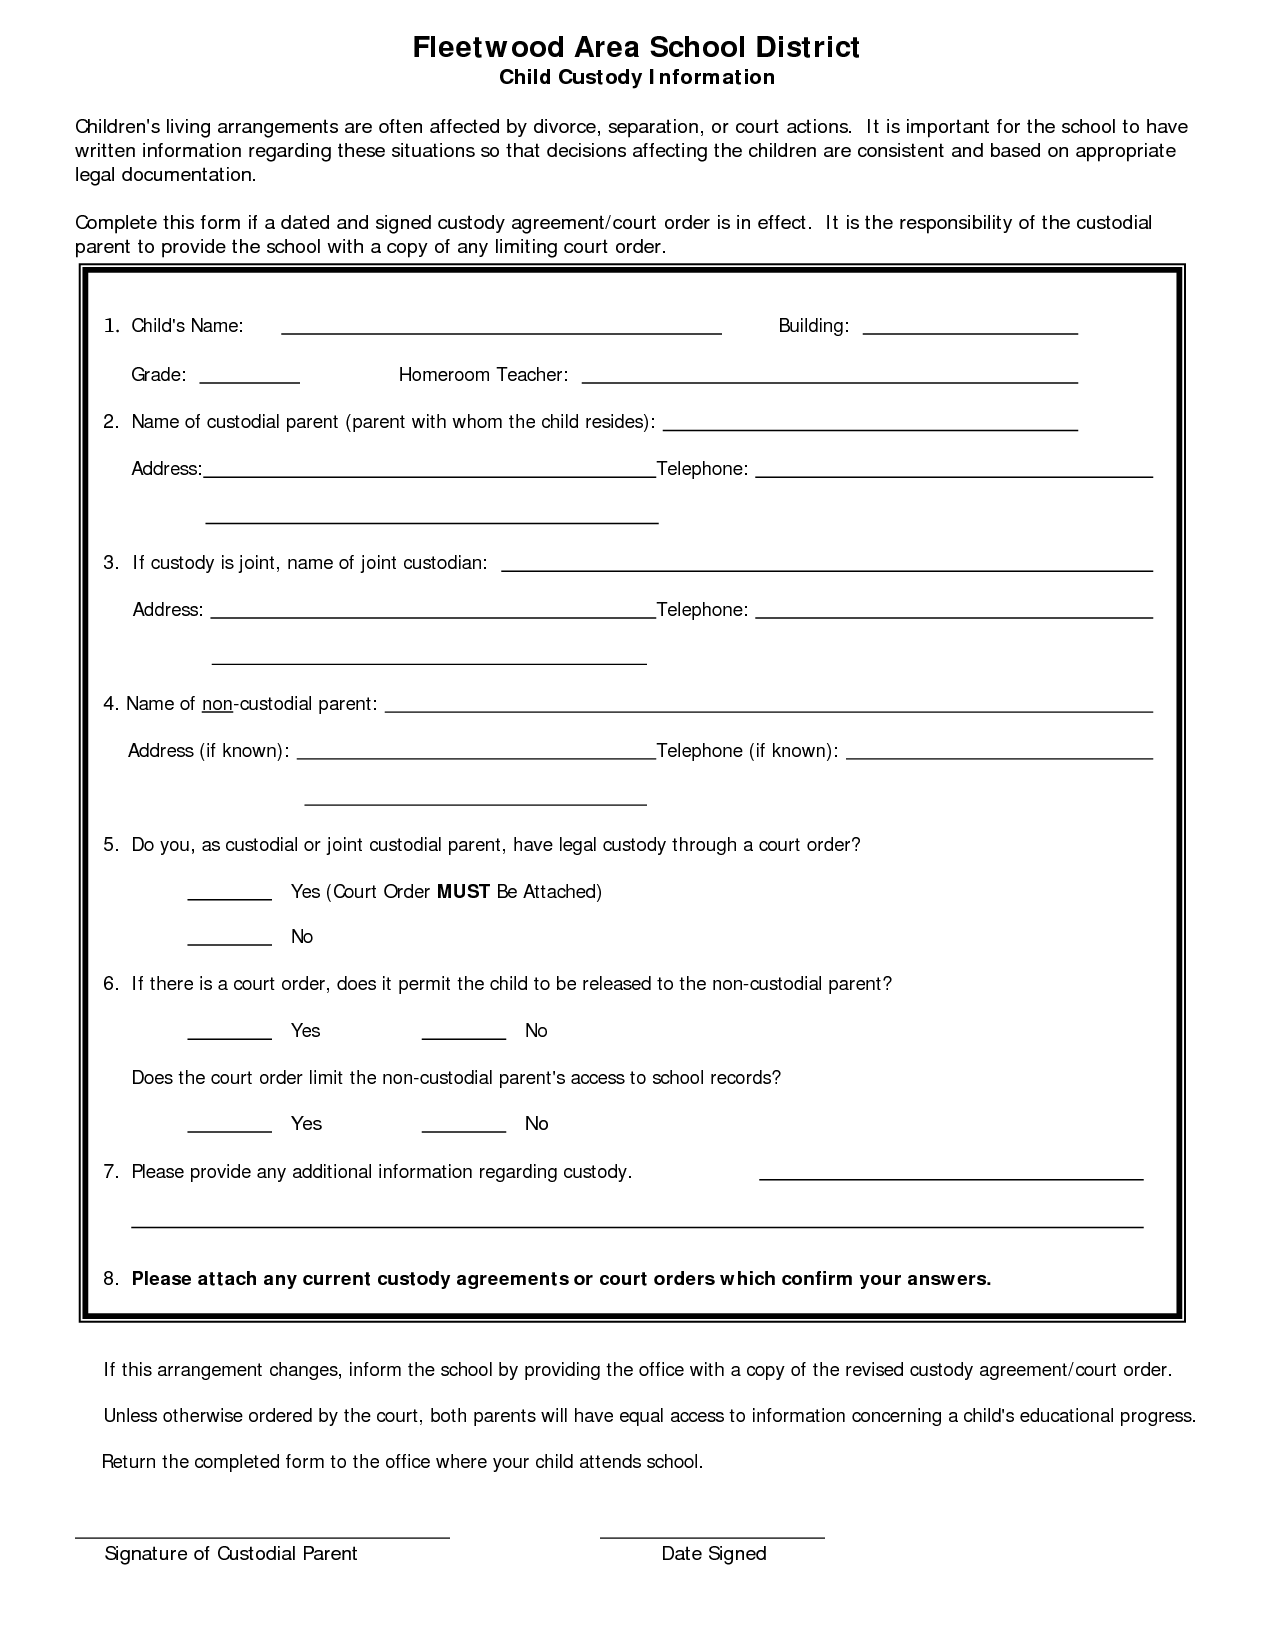 How To Fill Out Child Custody Papers